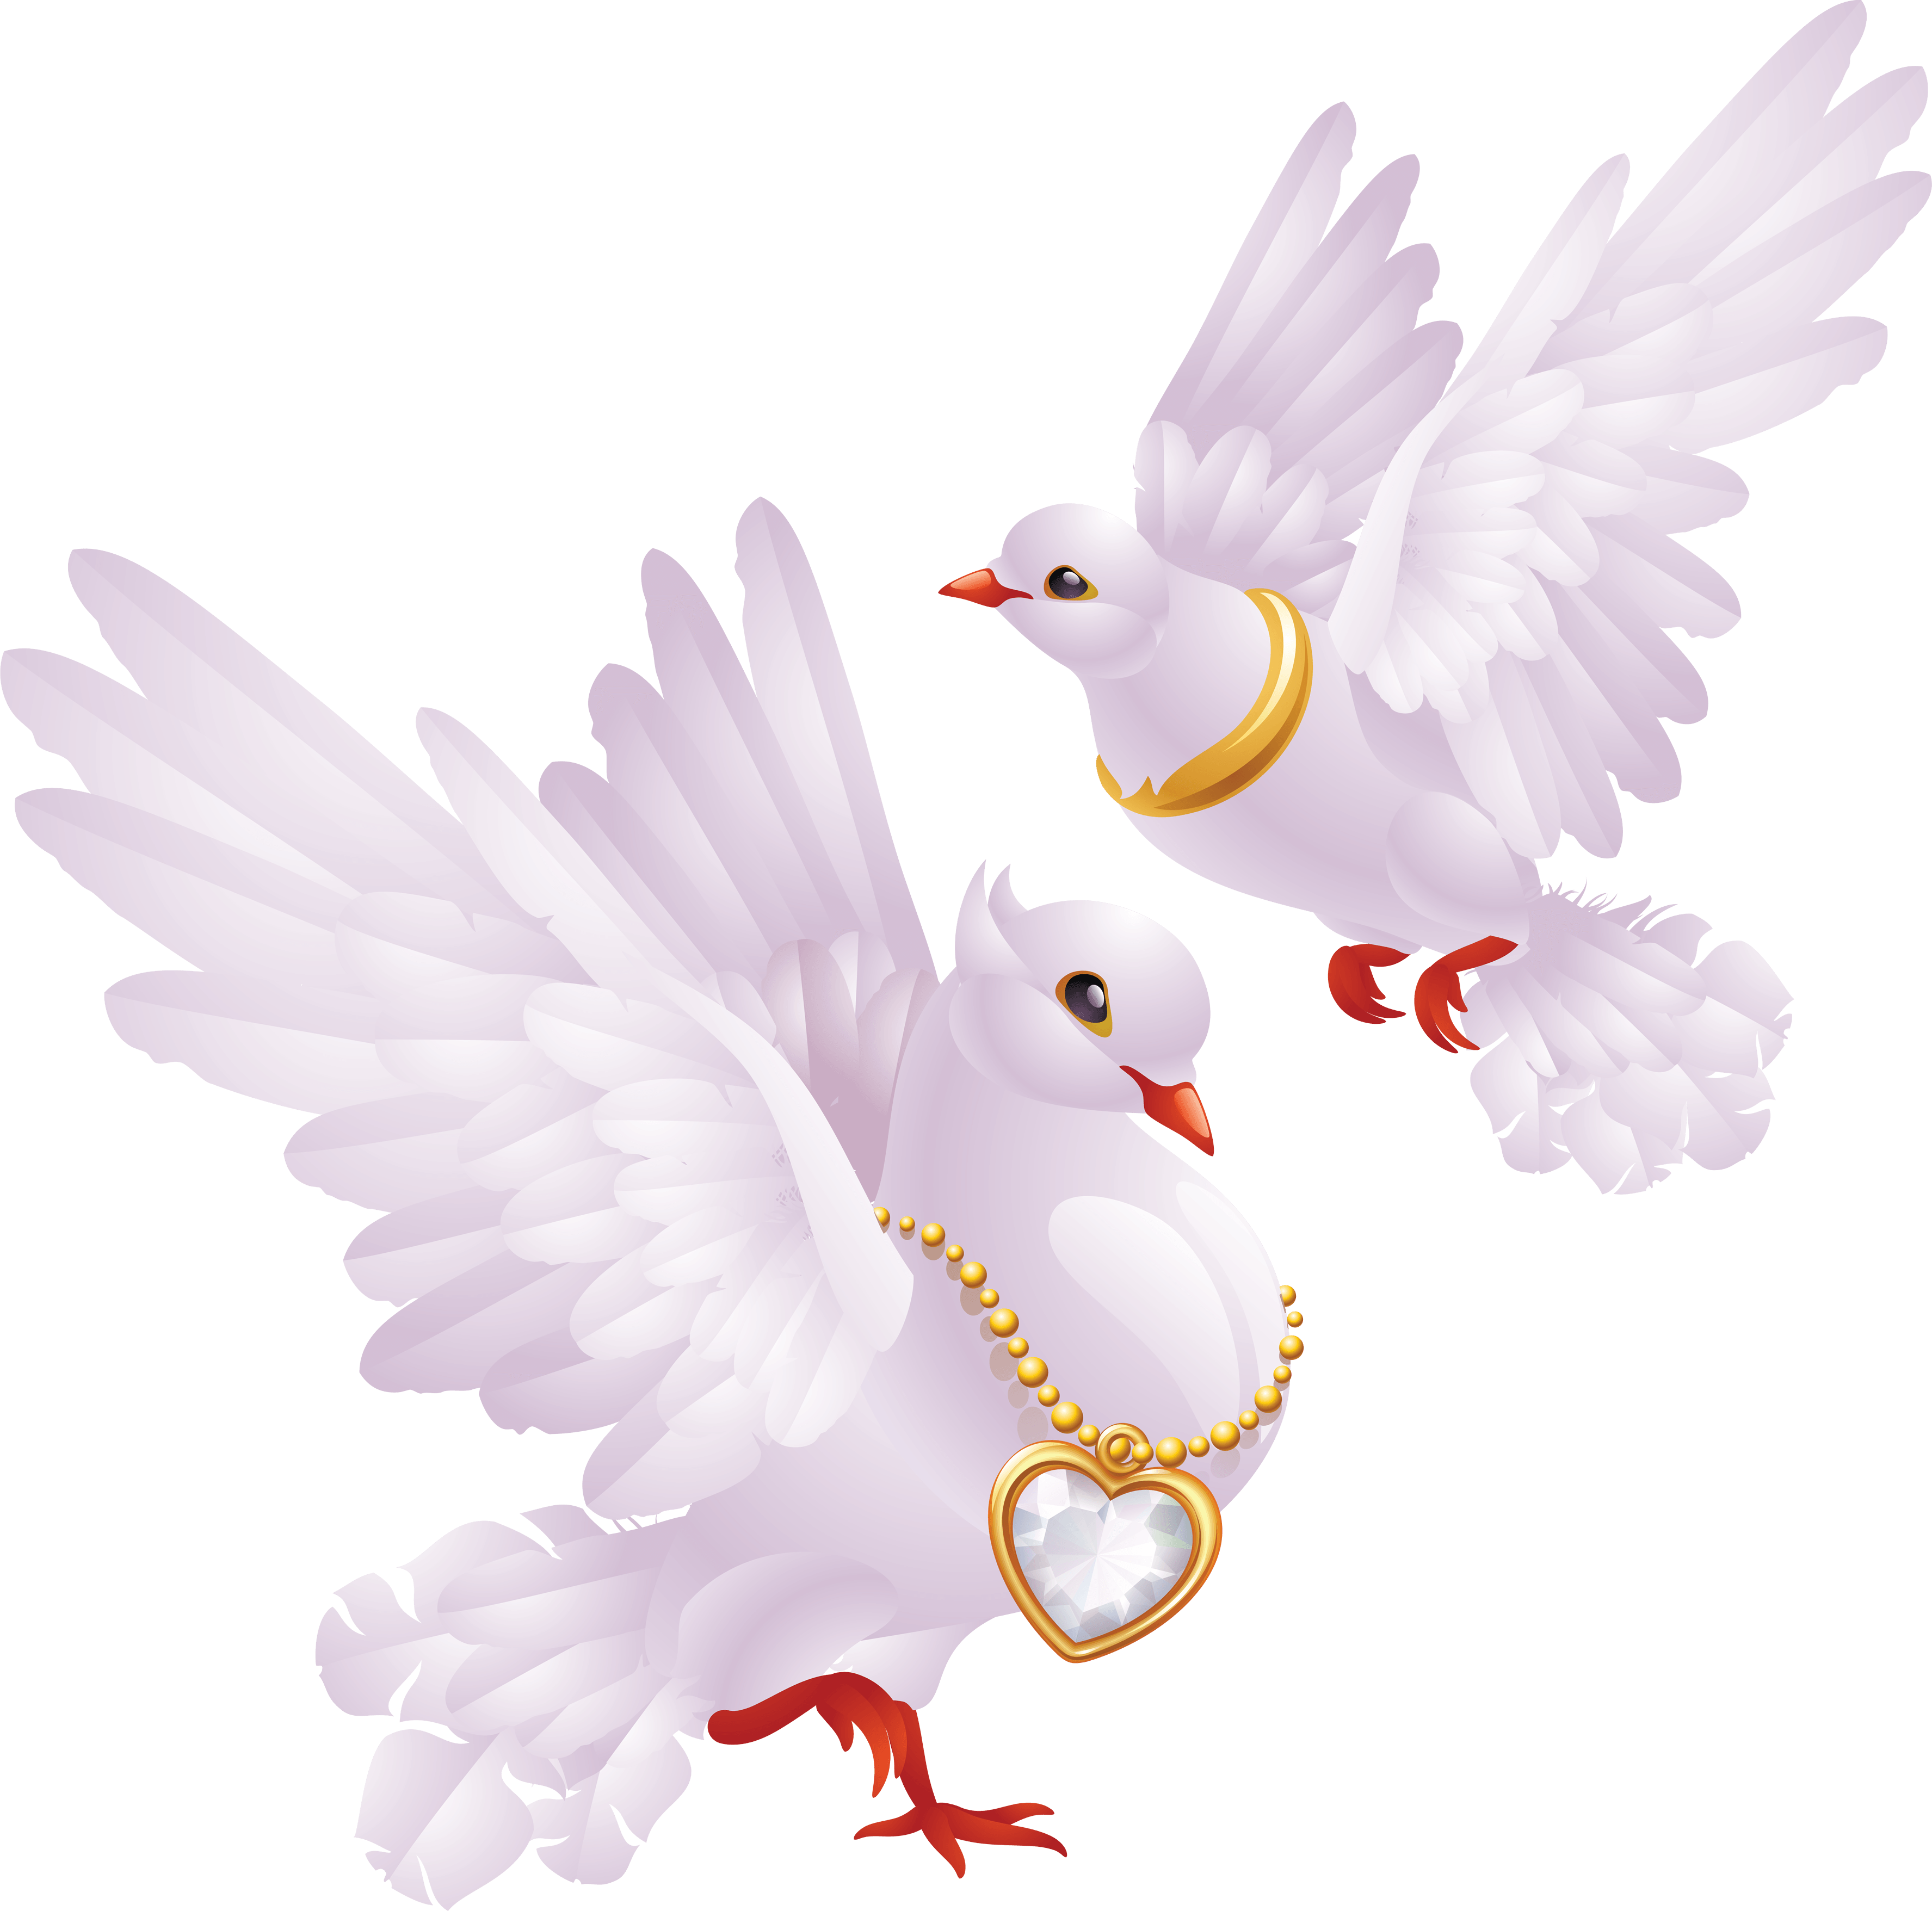 White Peace Pigeon HD Image Free PNG Image